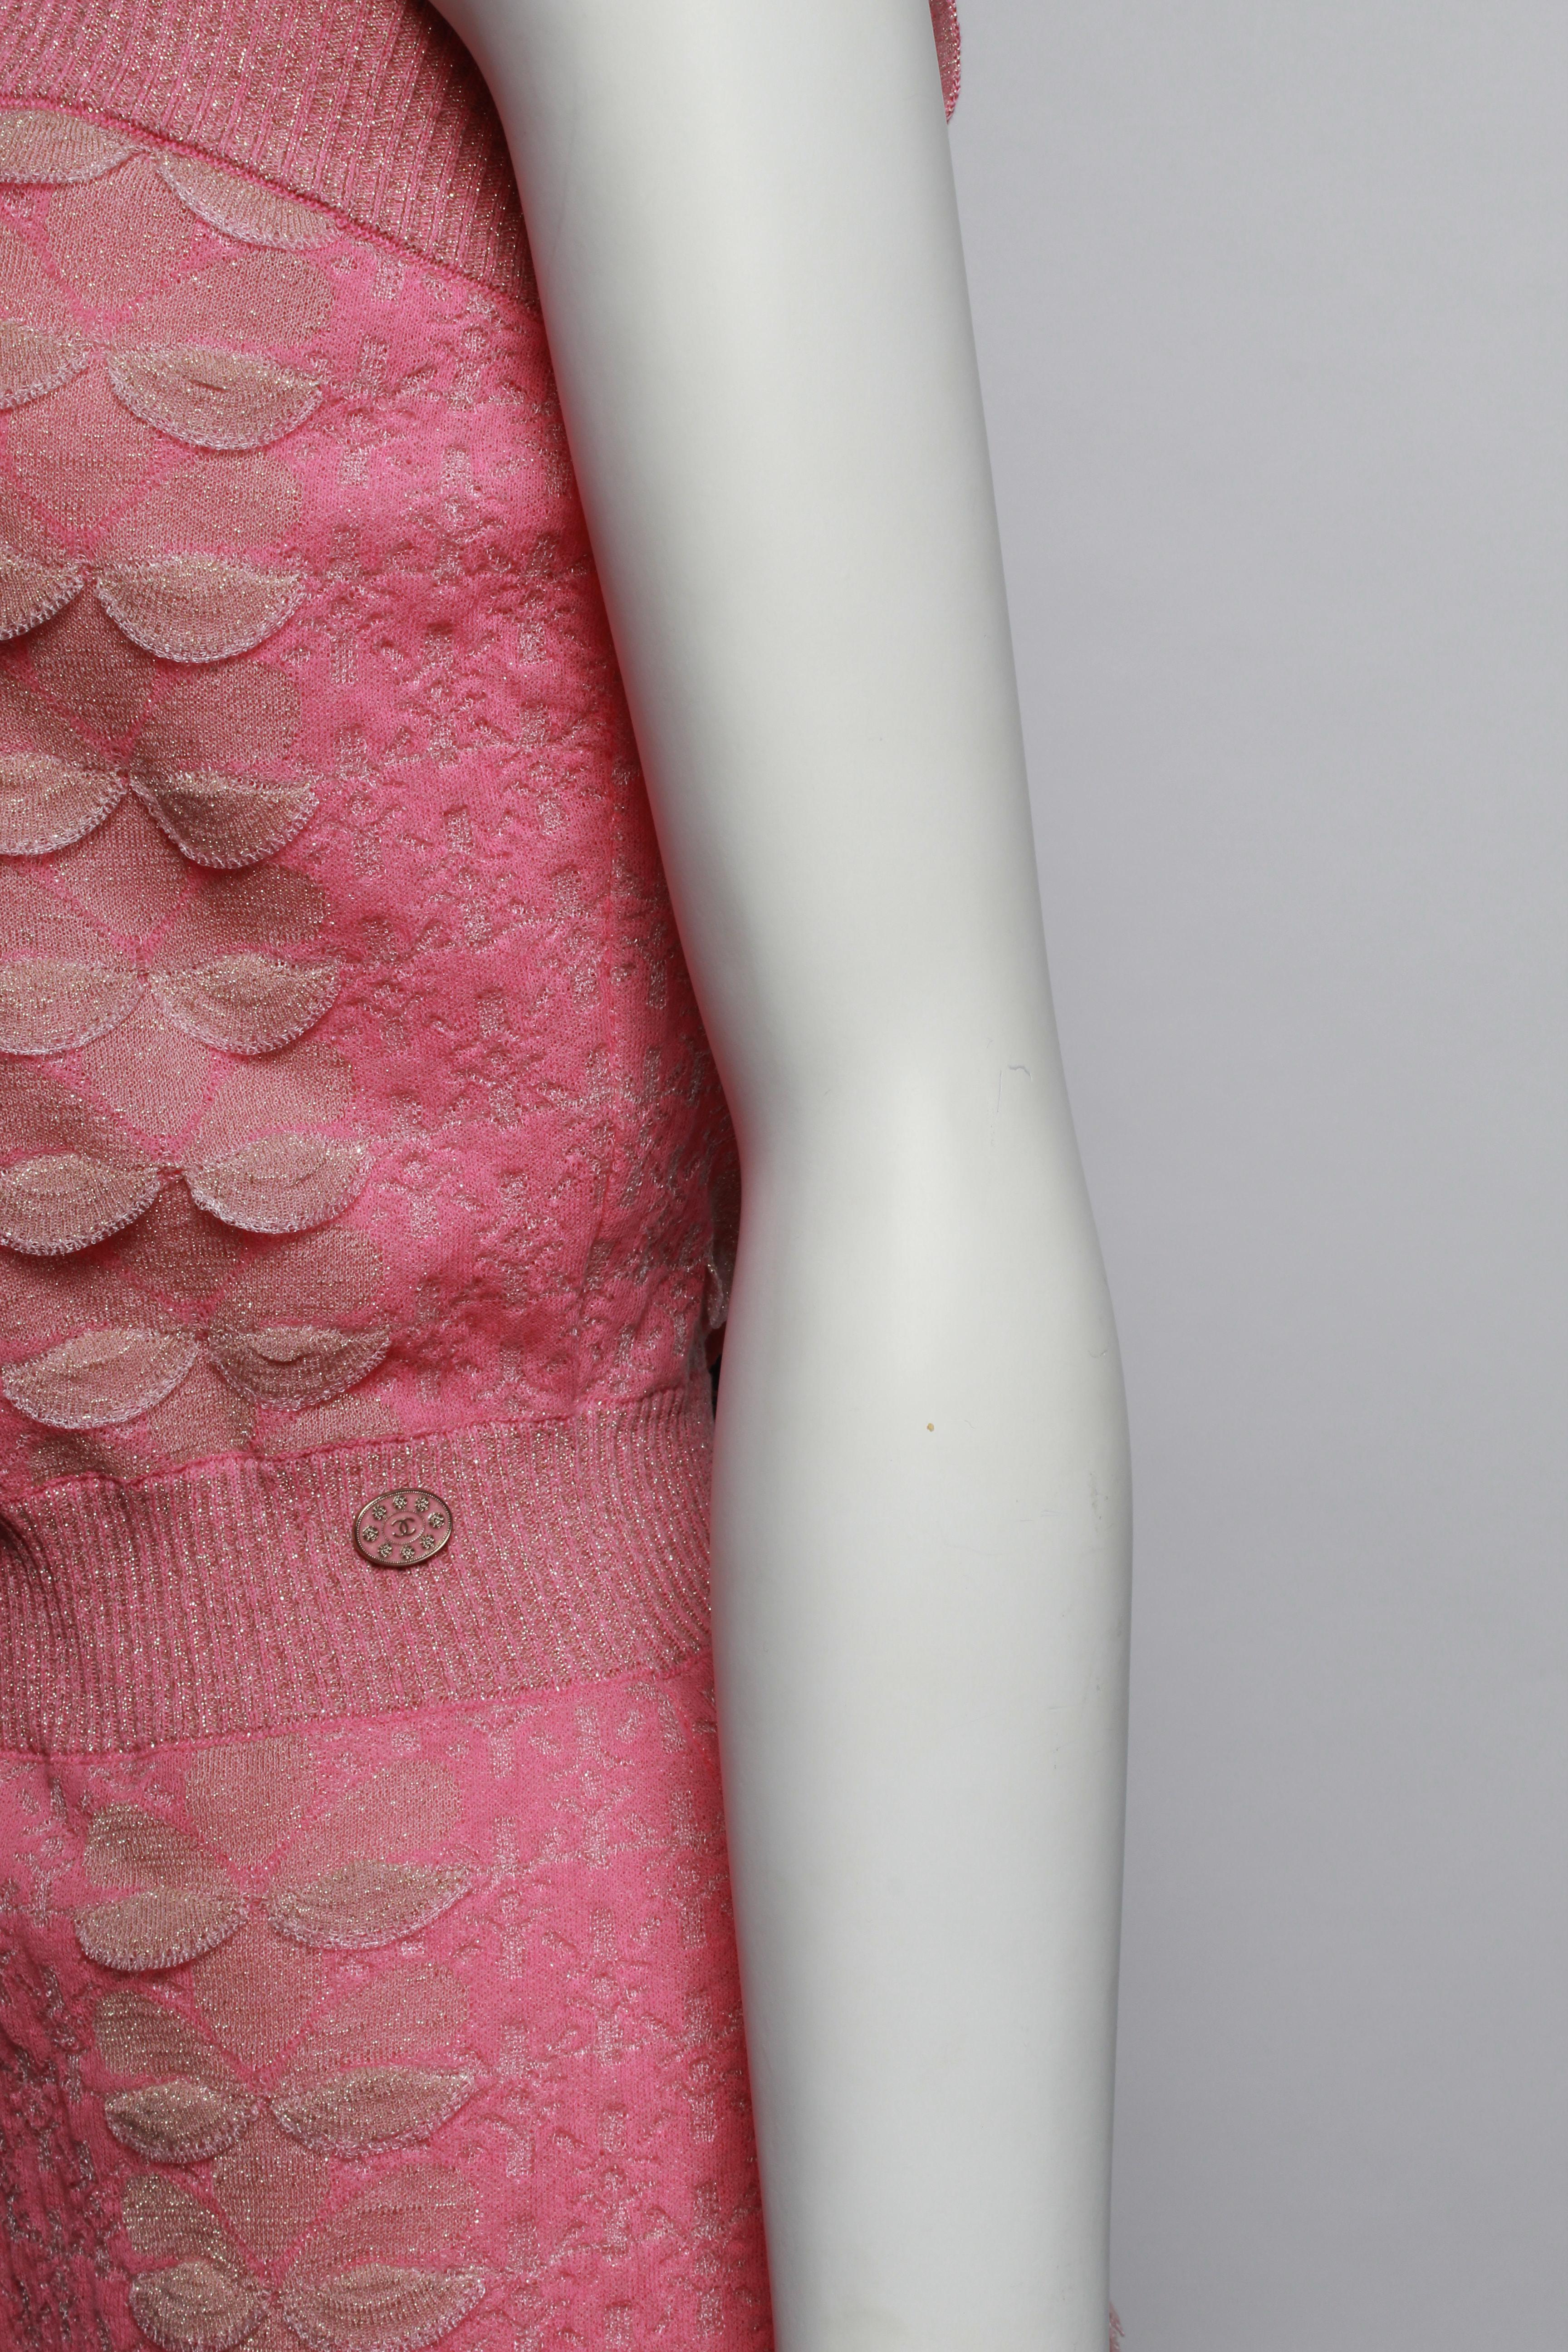 CHANEL 2016 Pink and Metallic Knit Mini Dress In Good Condition In Melbourne, Victoria